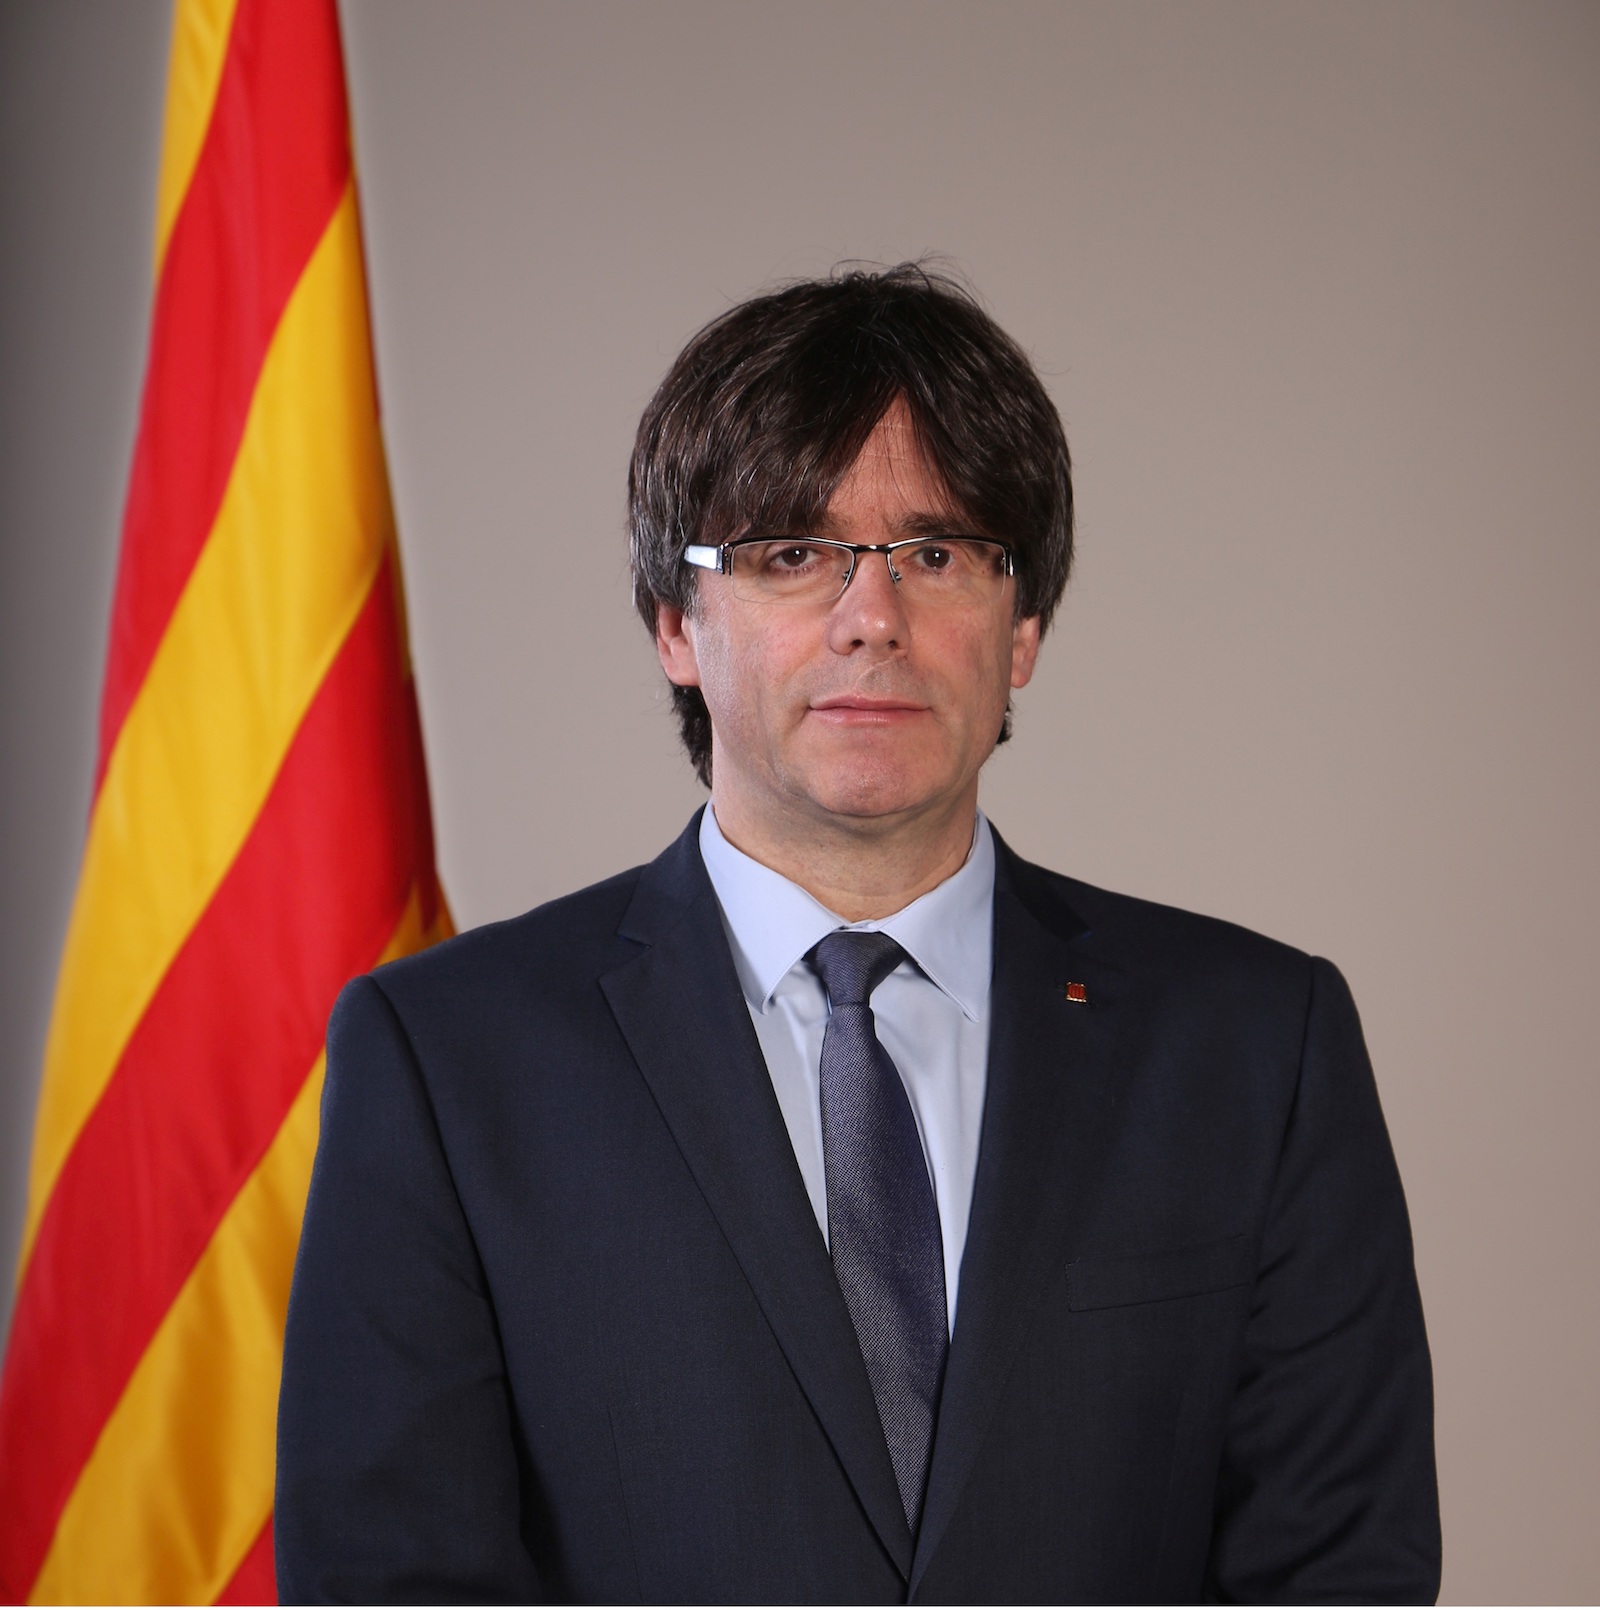 Carles Puigdemont, president of Catalonia